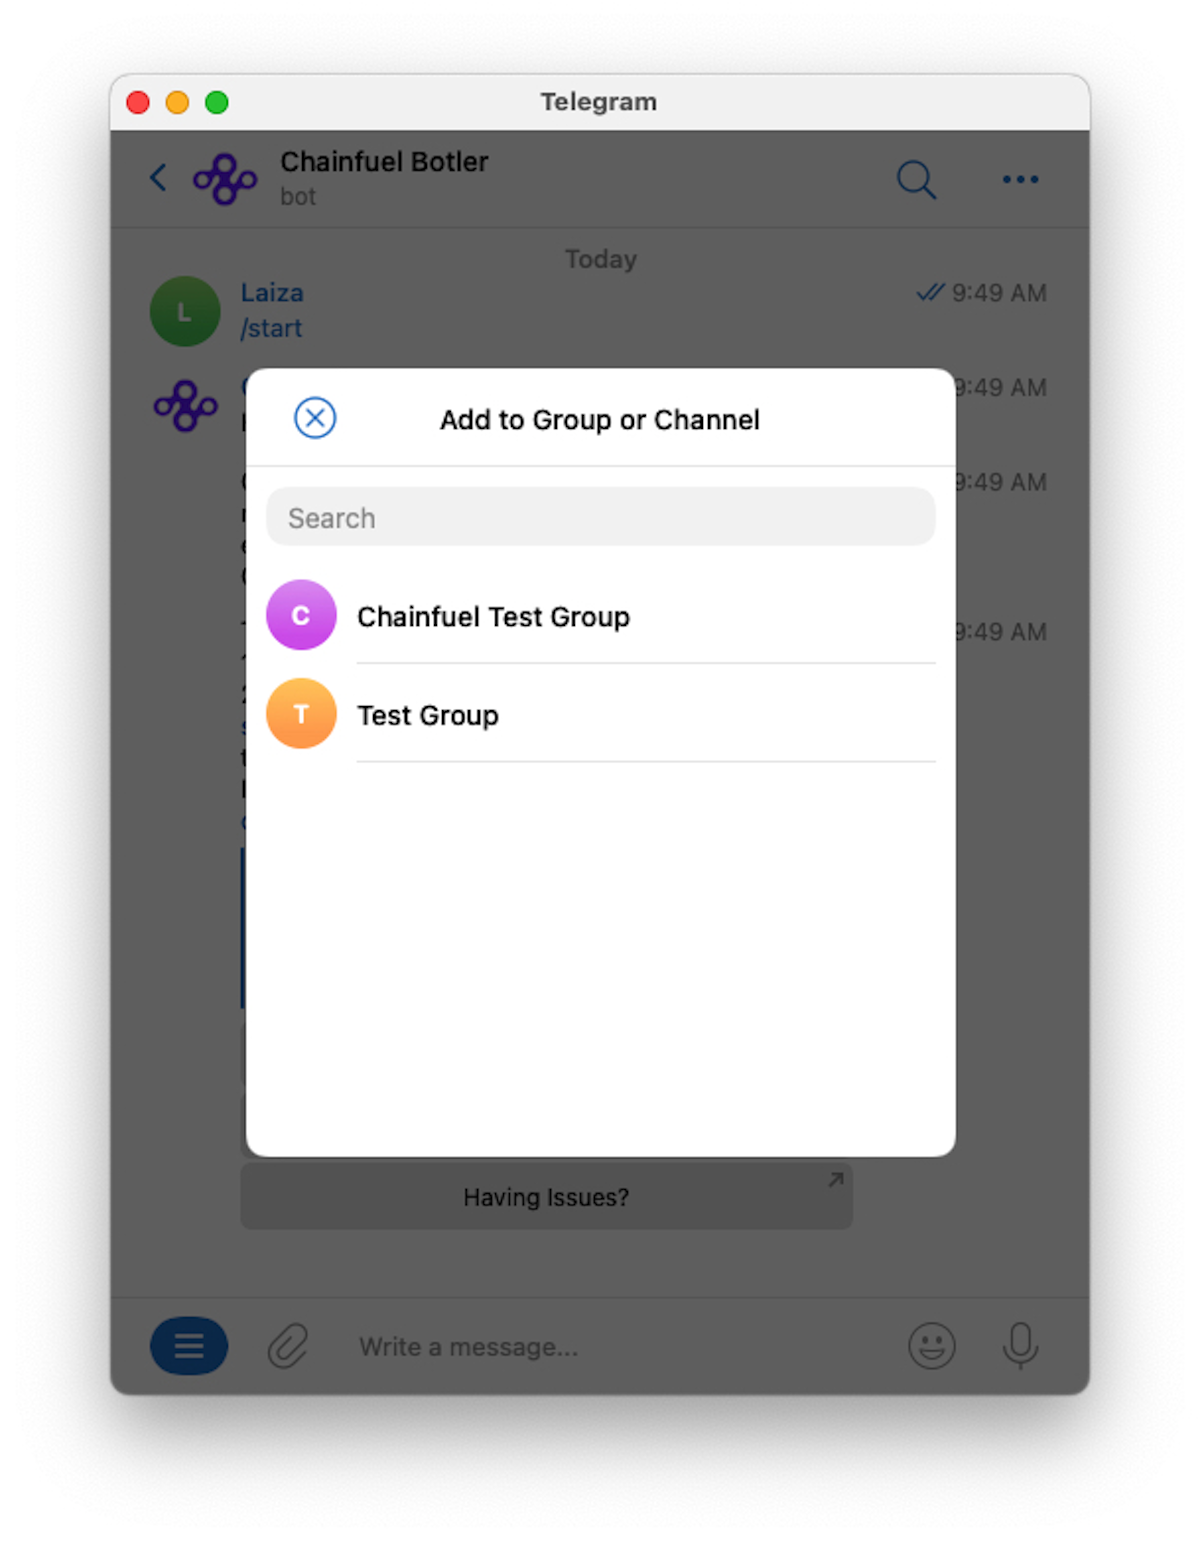 The list of all your Telegram groups will appear. Select a group to add the Chainfuel bot to.